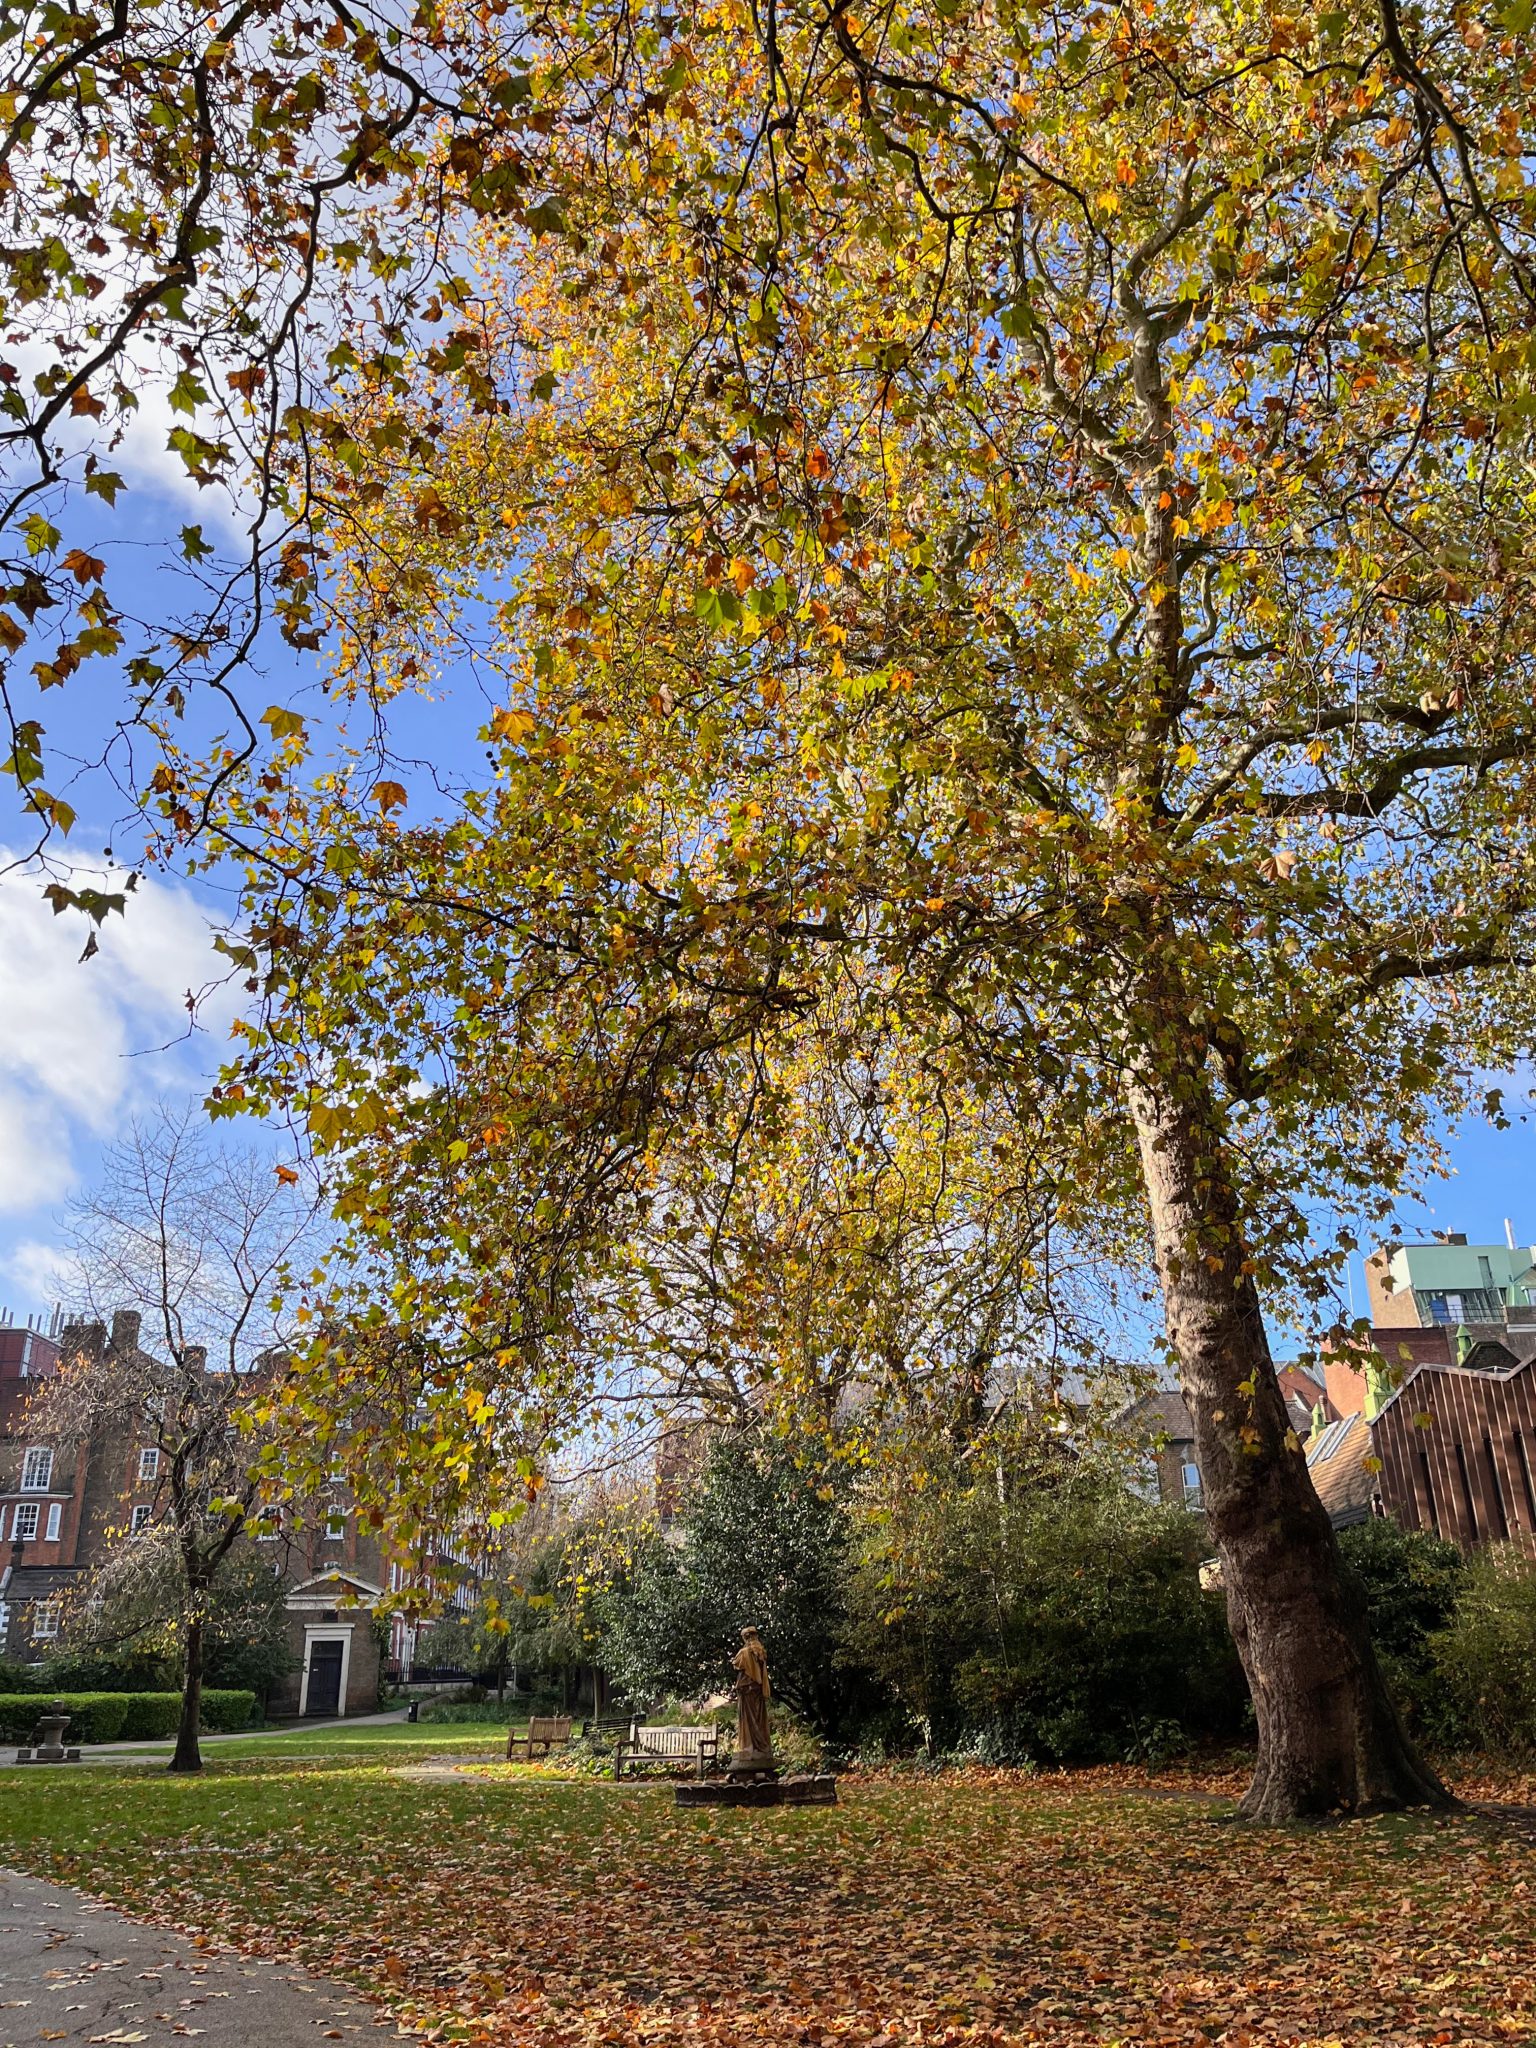 Autumn noon at Saint George's Gardens in London